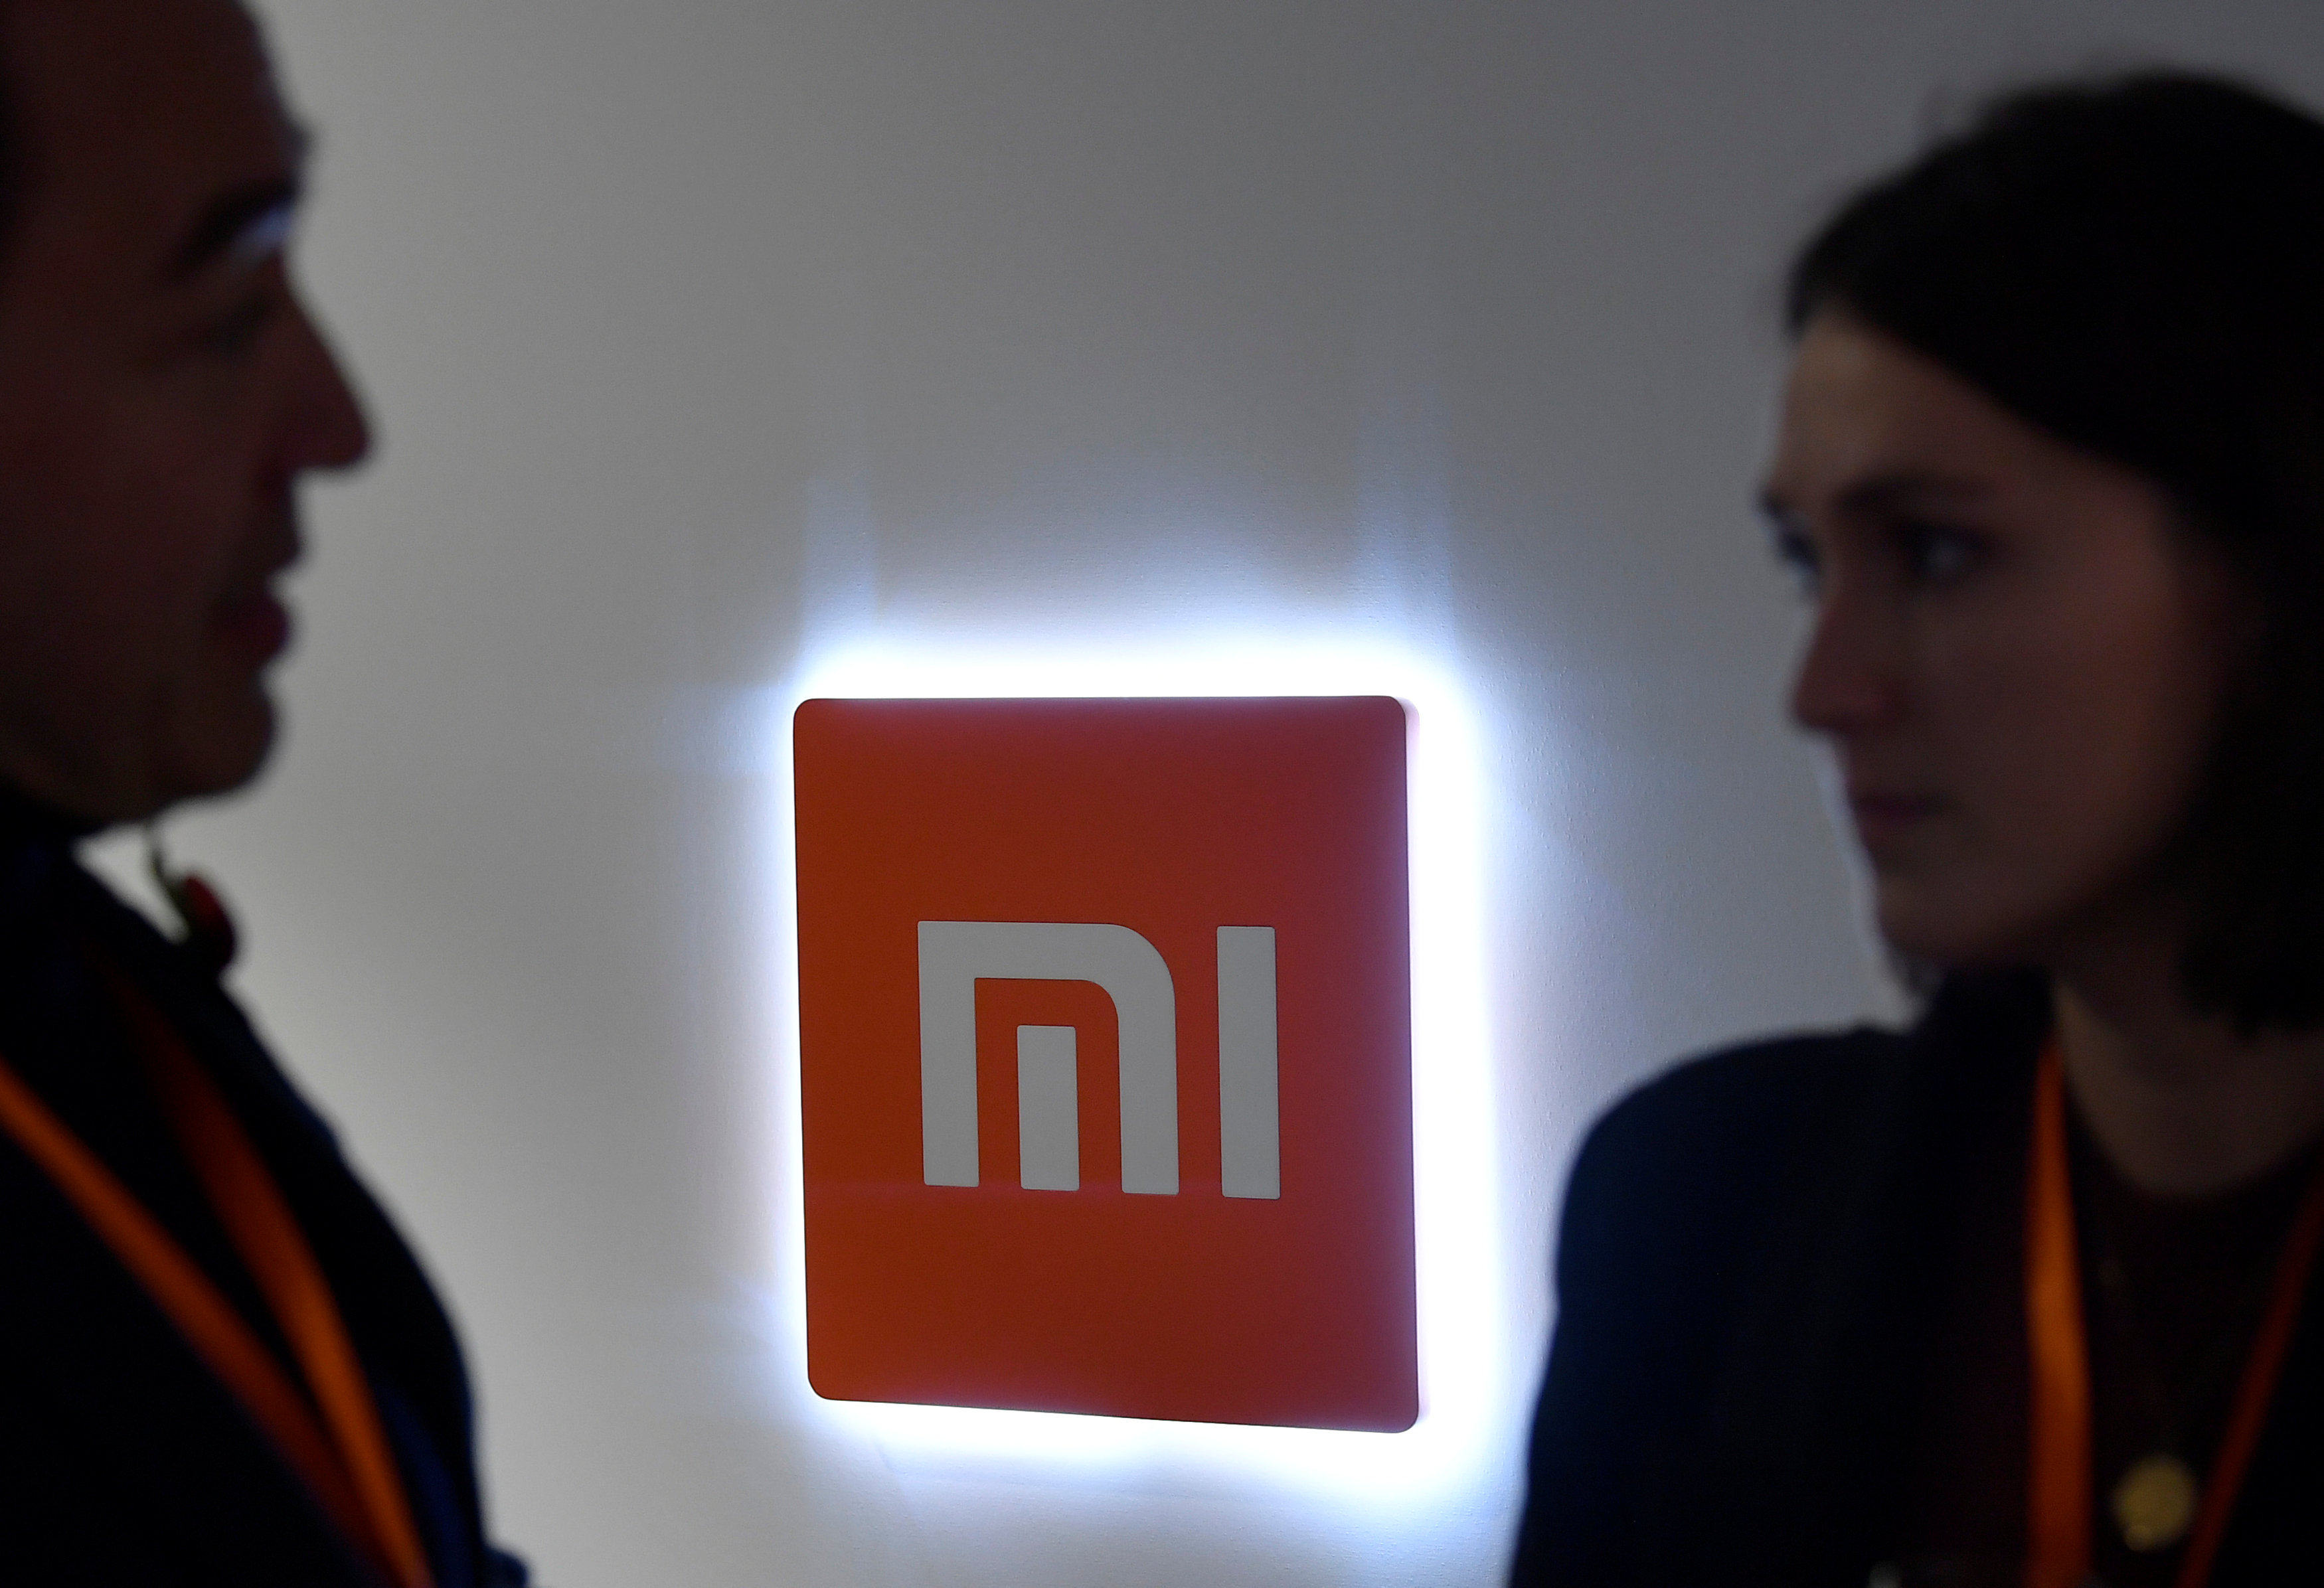 The Xiaomi logo is seen at a launch event. Photo: Reuters